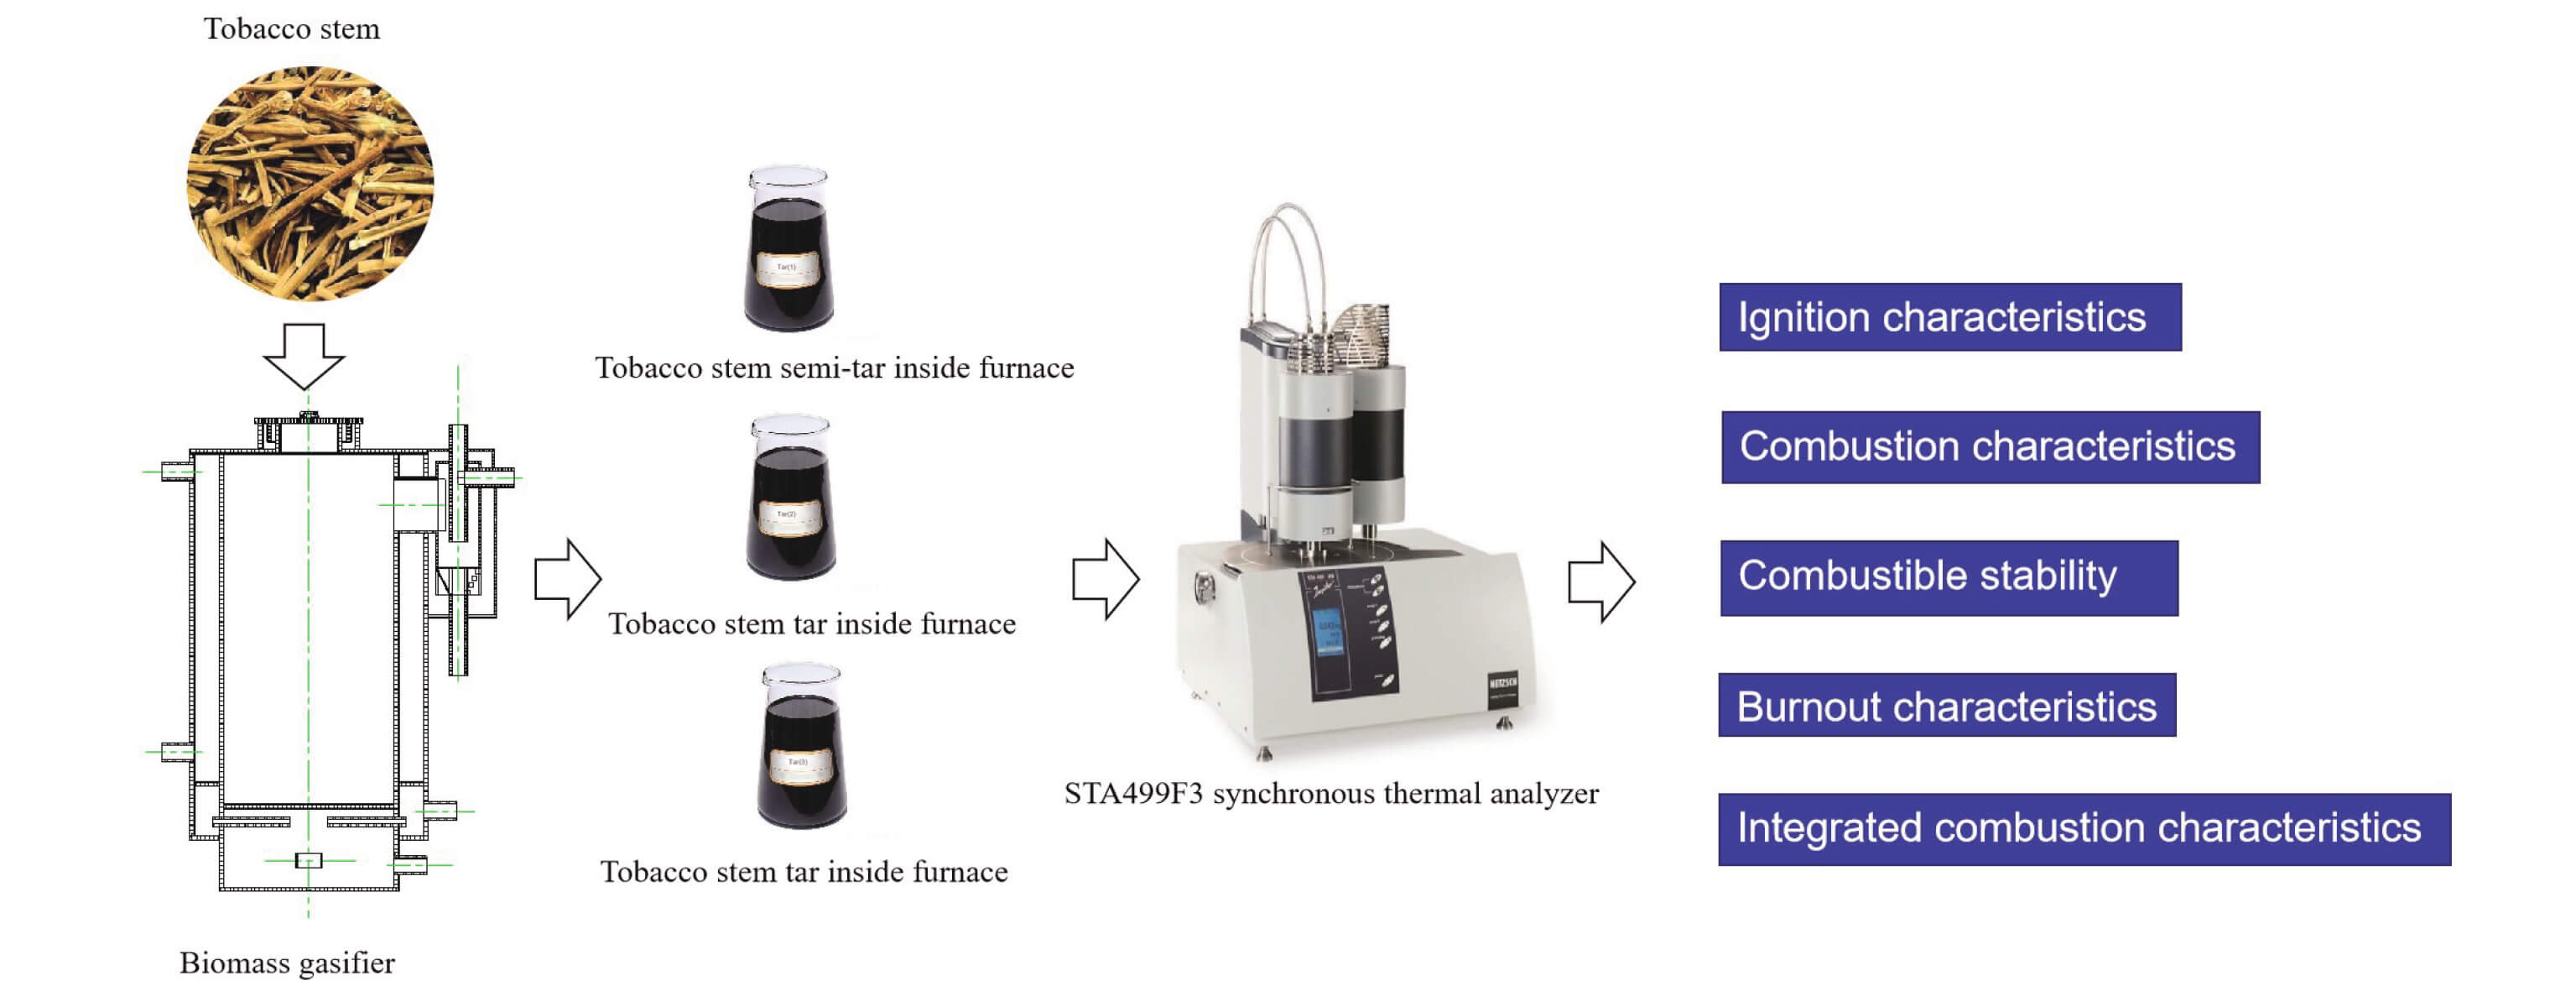 Comparison of Combustion Characteristics of Tars Produced with Tobacco Stem Biomass Gasification